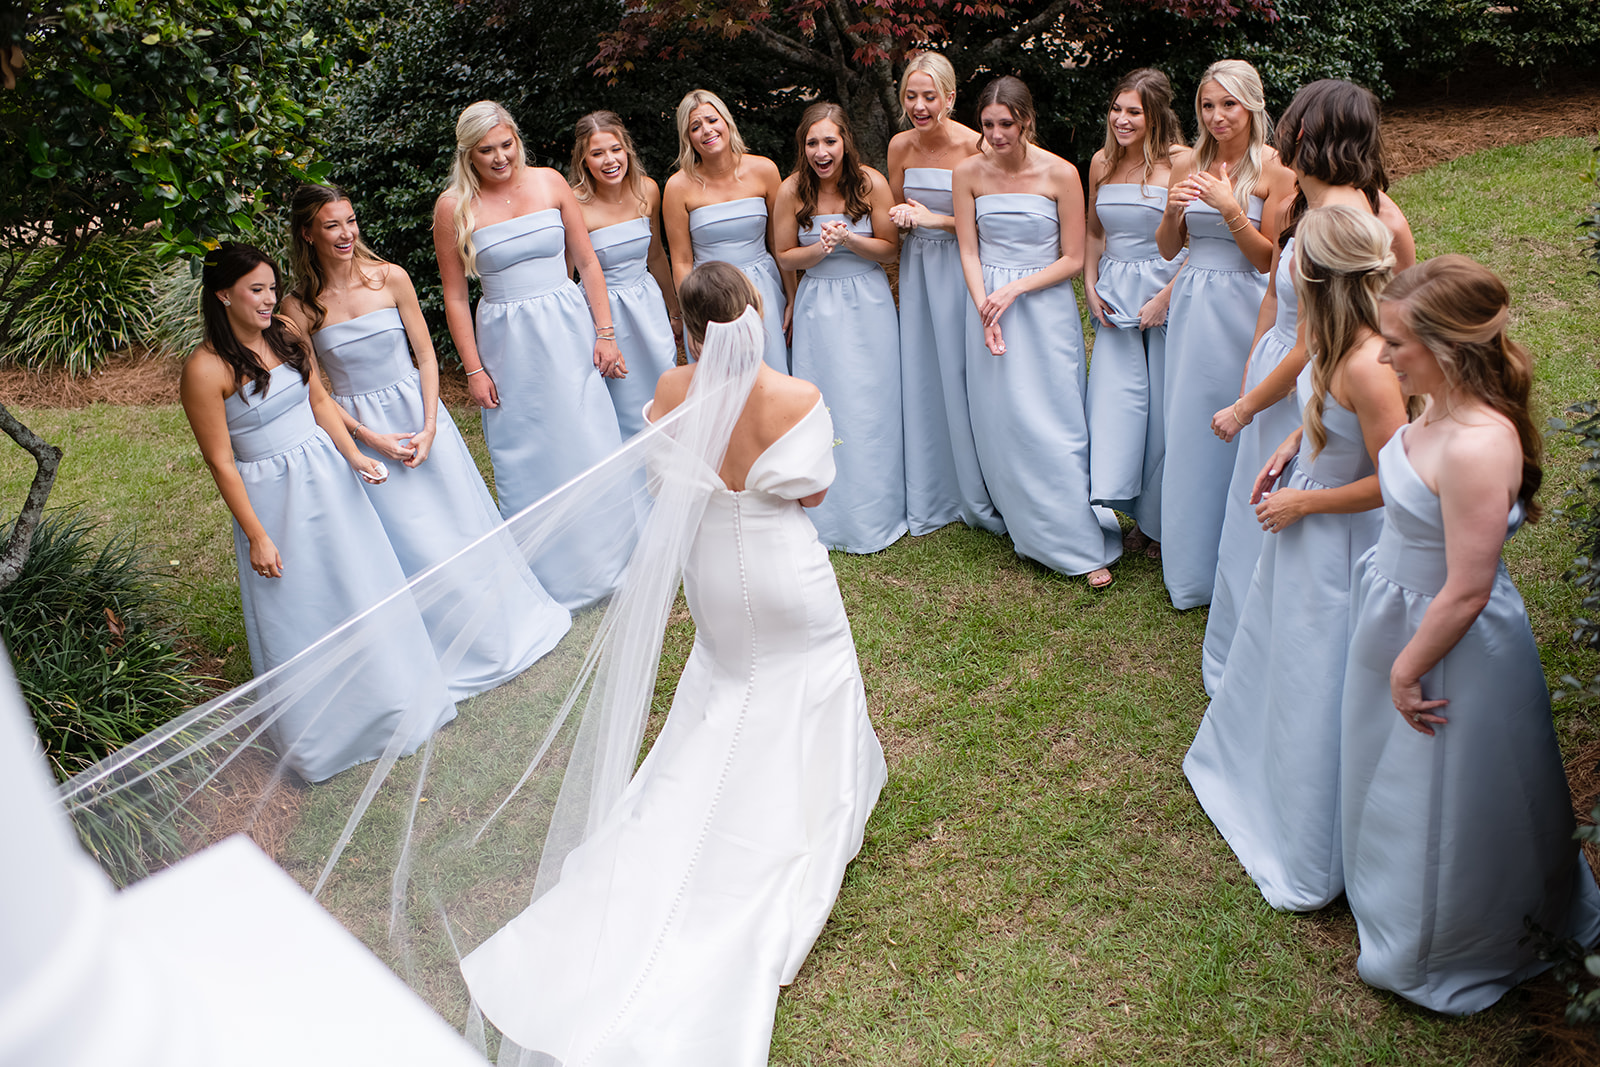 Bridesmaids dresses in pretty pastel shade of Blue with a simple silhouette that suits every body type and skin.